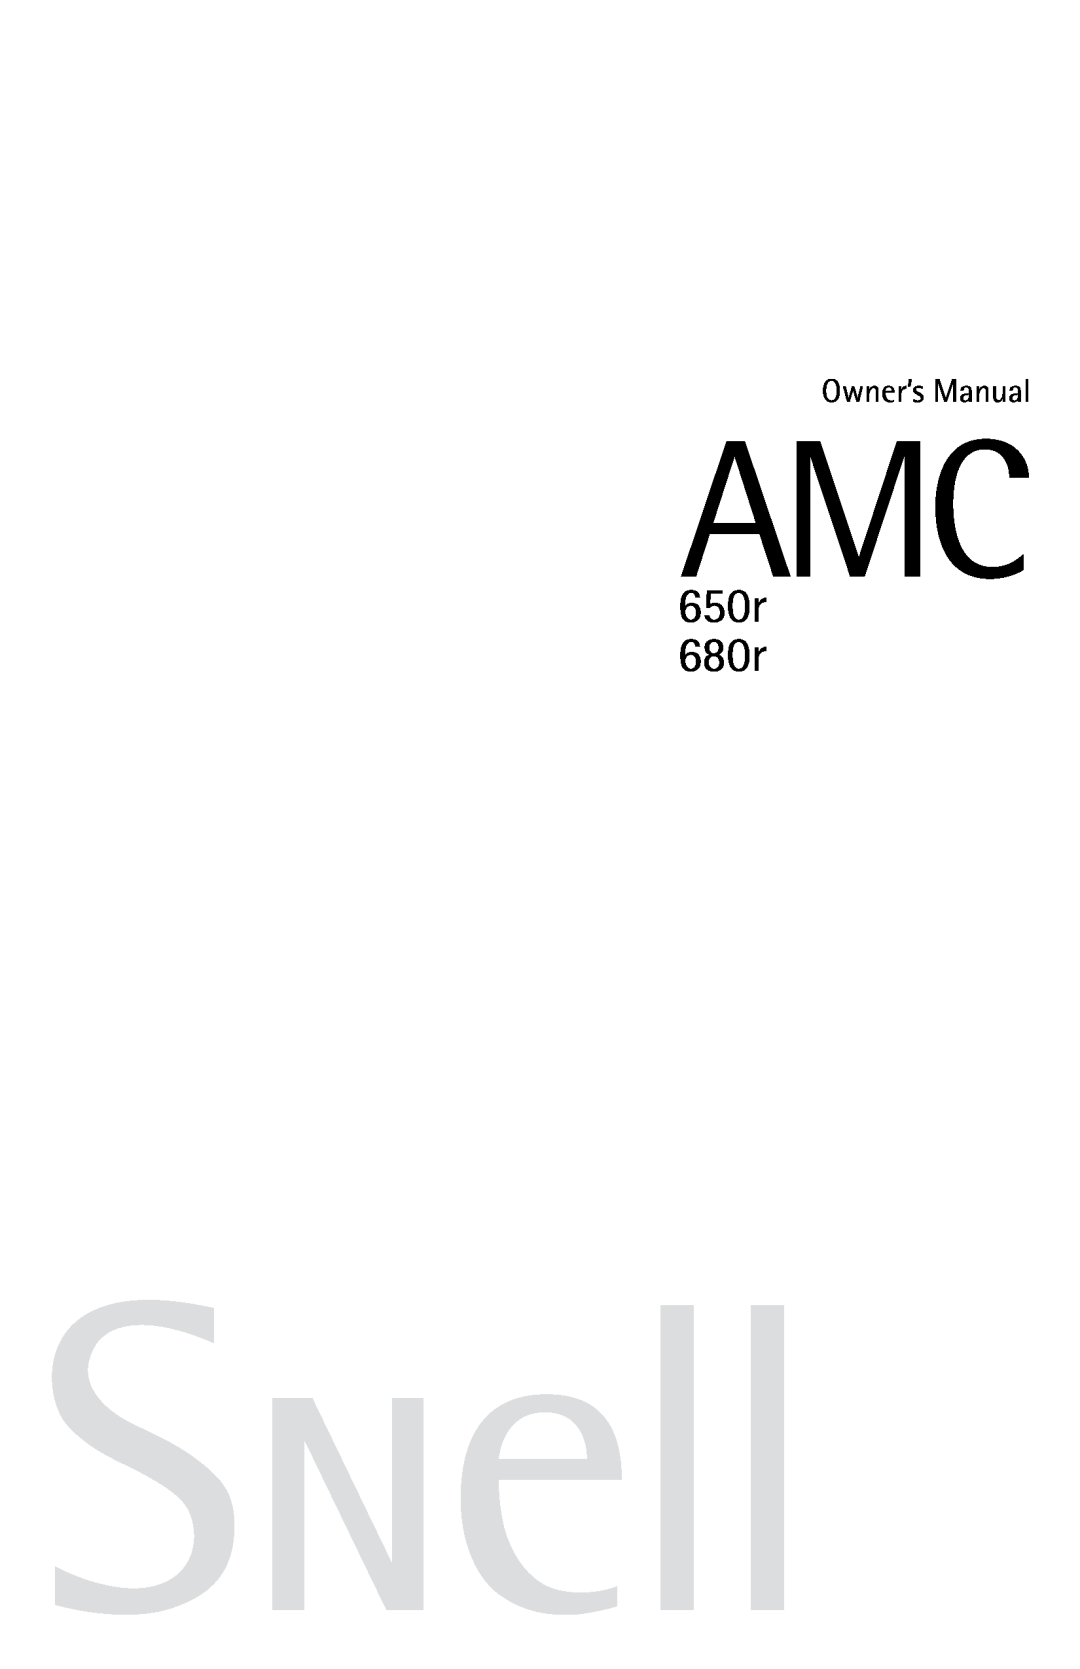 Snell Acoustics owner manual 650r 680r 